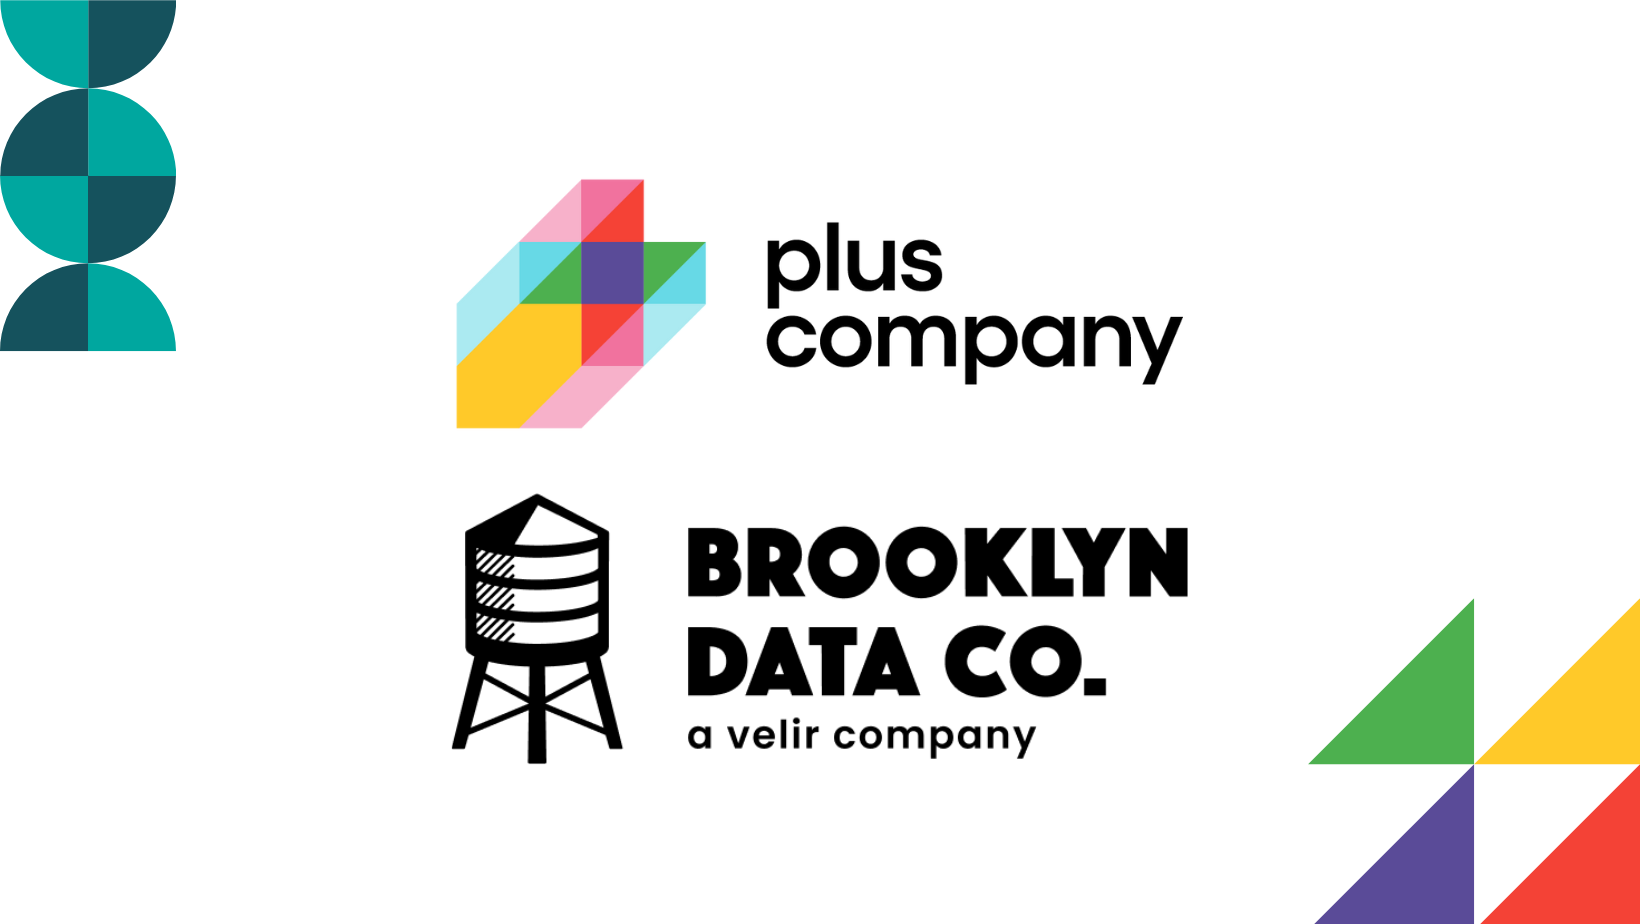 Plus Company Expands Data Management Service and Partnership with Brooklyn Data Co. to Unleash AI Potential For Clients